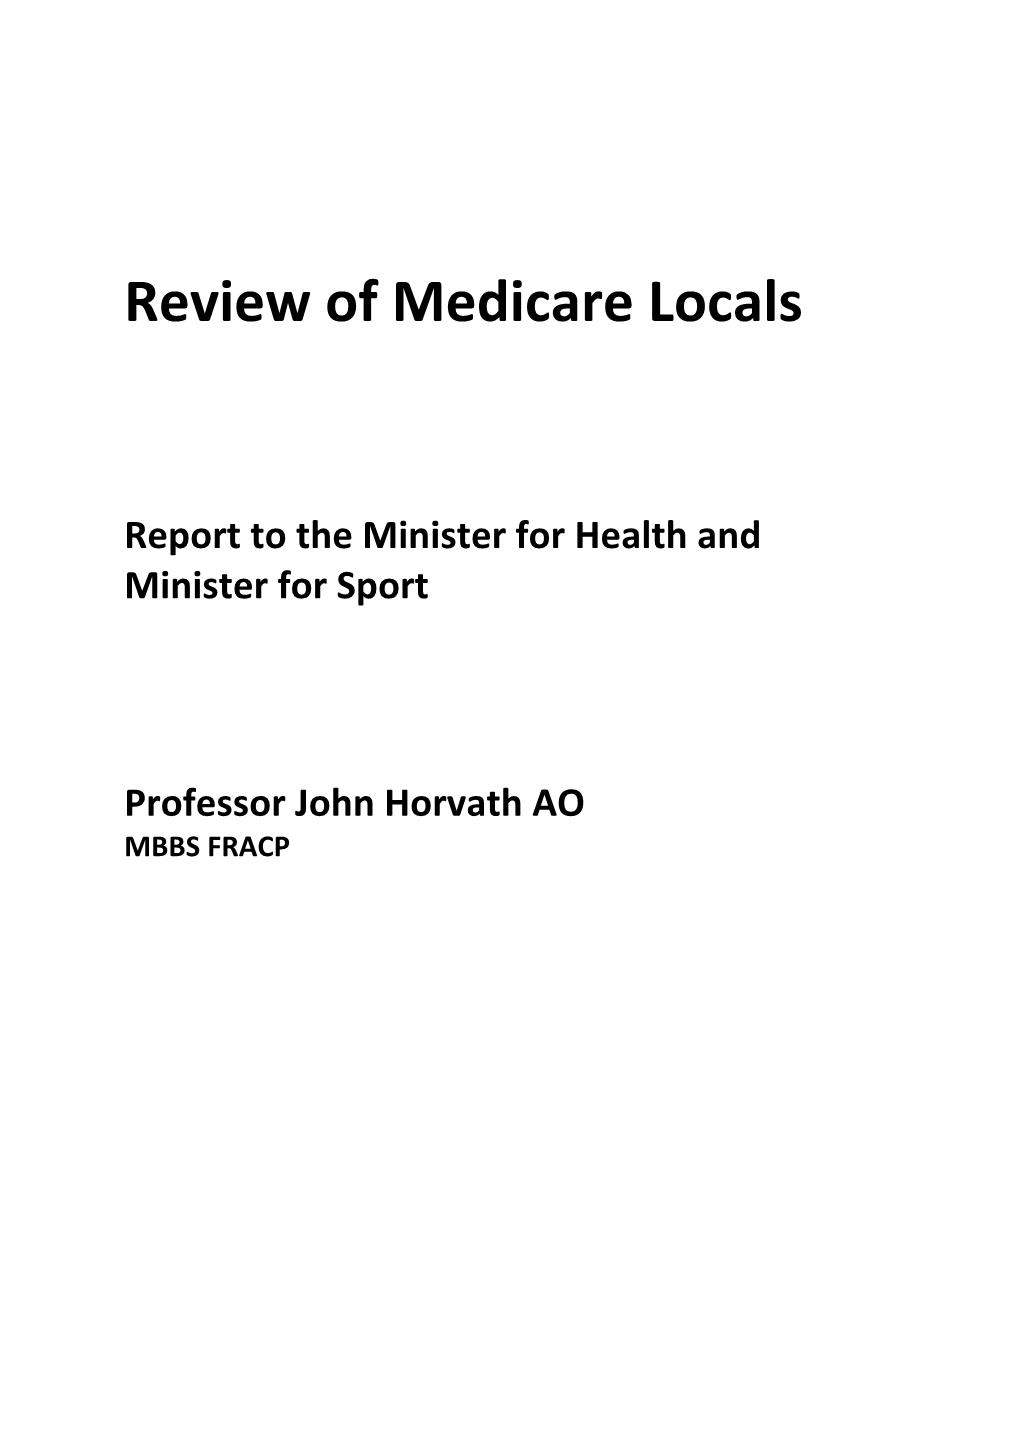 Report to the Minister for Health And